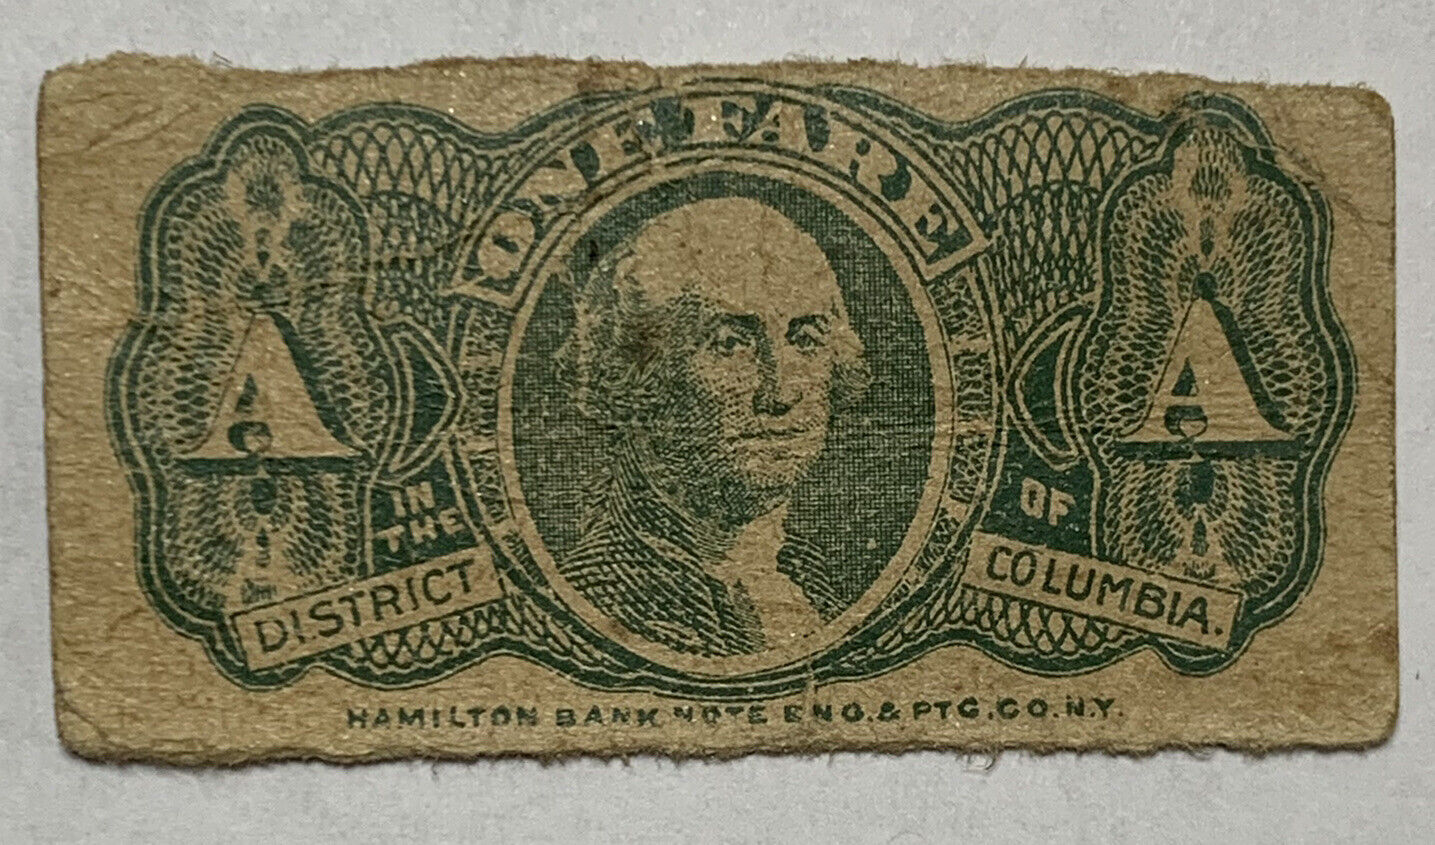 WASHINGTON RAILWAY & ELECTRIC COMPANY DISTRICT OF COLUMBIA ONE FARE BANK NOTE